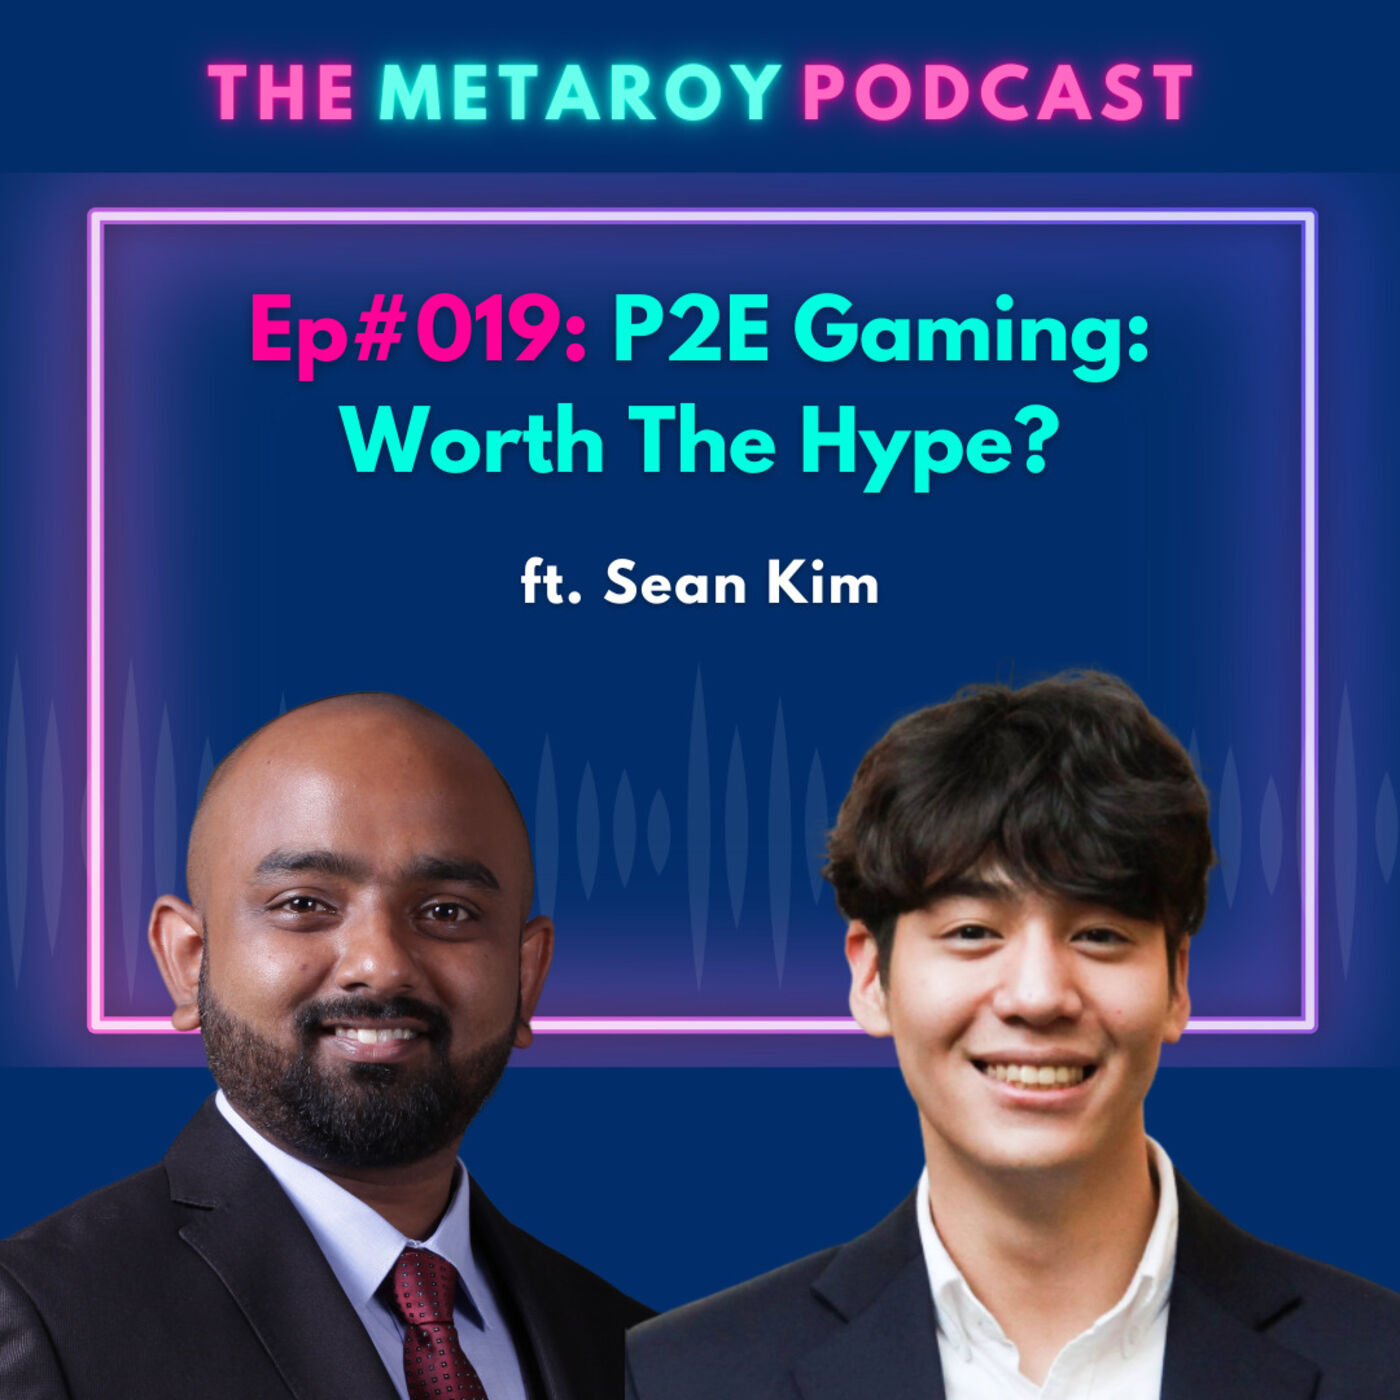 Sean Kim: Play to Earn Gaming - Worth The Hype? | Ep #019